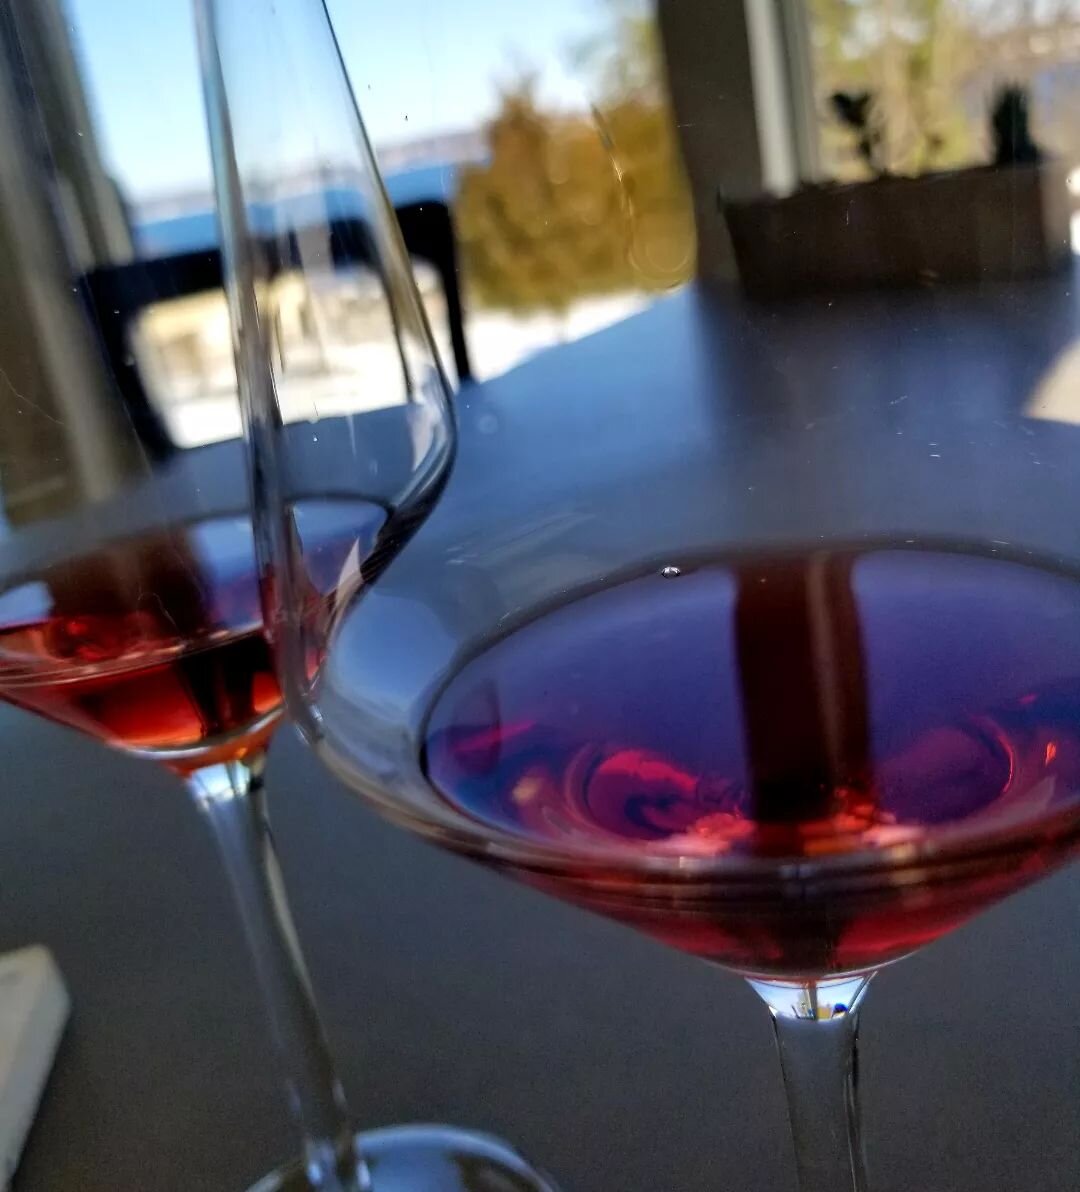 Gorgeous day, so I took a little #roadtrip to the #flx to taste new-release #pinotnoir from @sixeightycellars The 2021(left) is light and bright with cherry/berry flavors, great for spring. The 2022 is medium-bodied, a litlle more intense with cherry